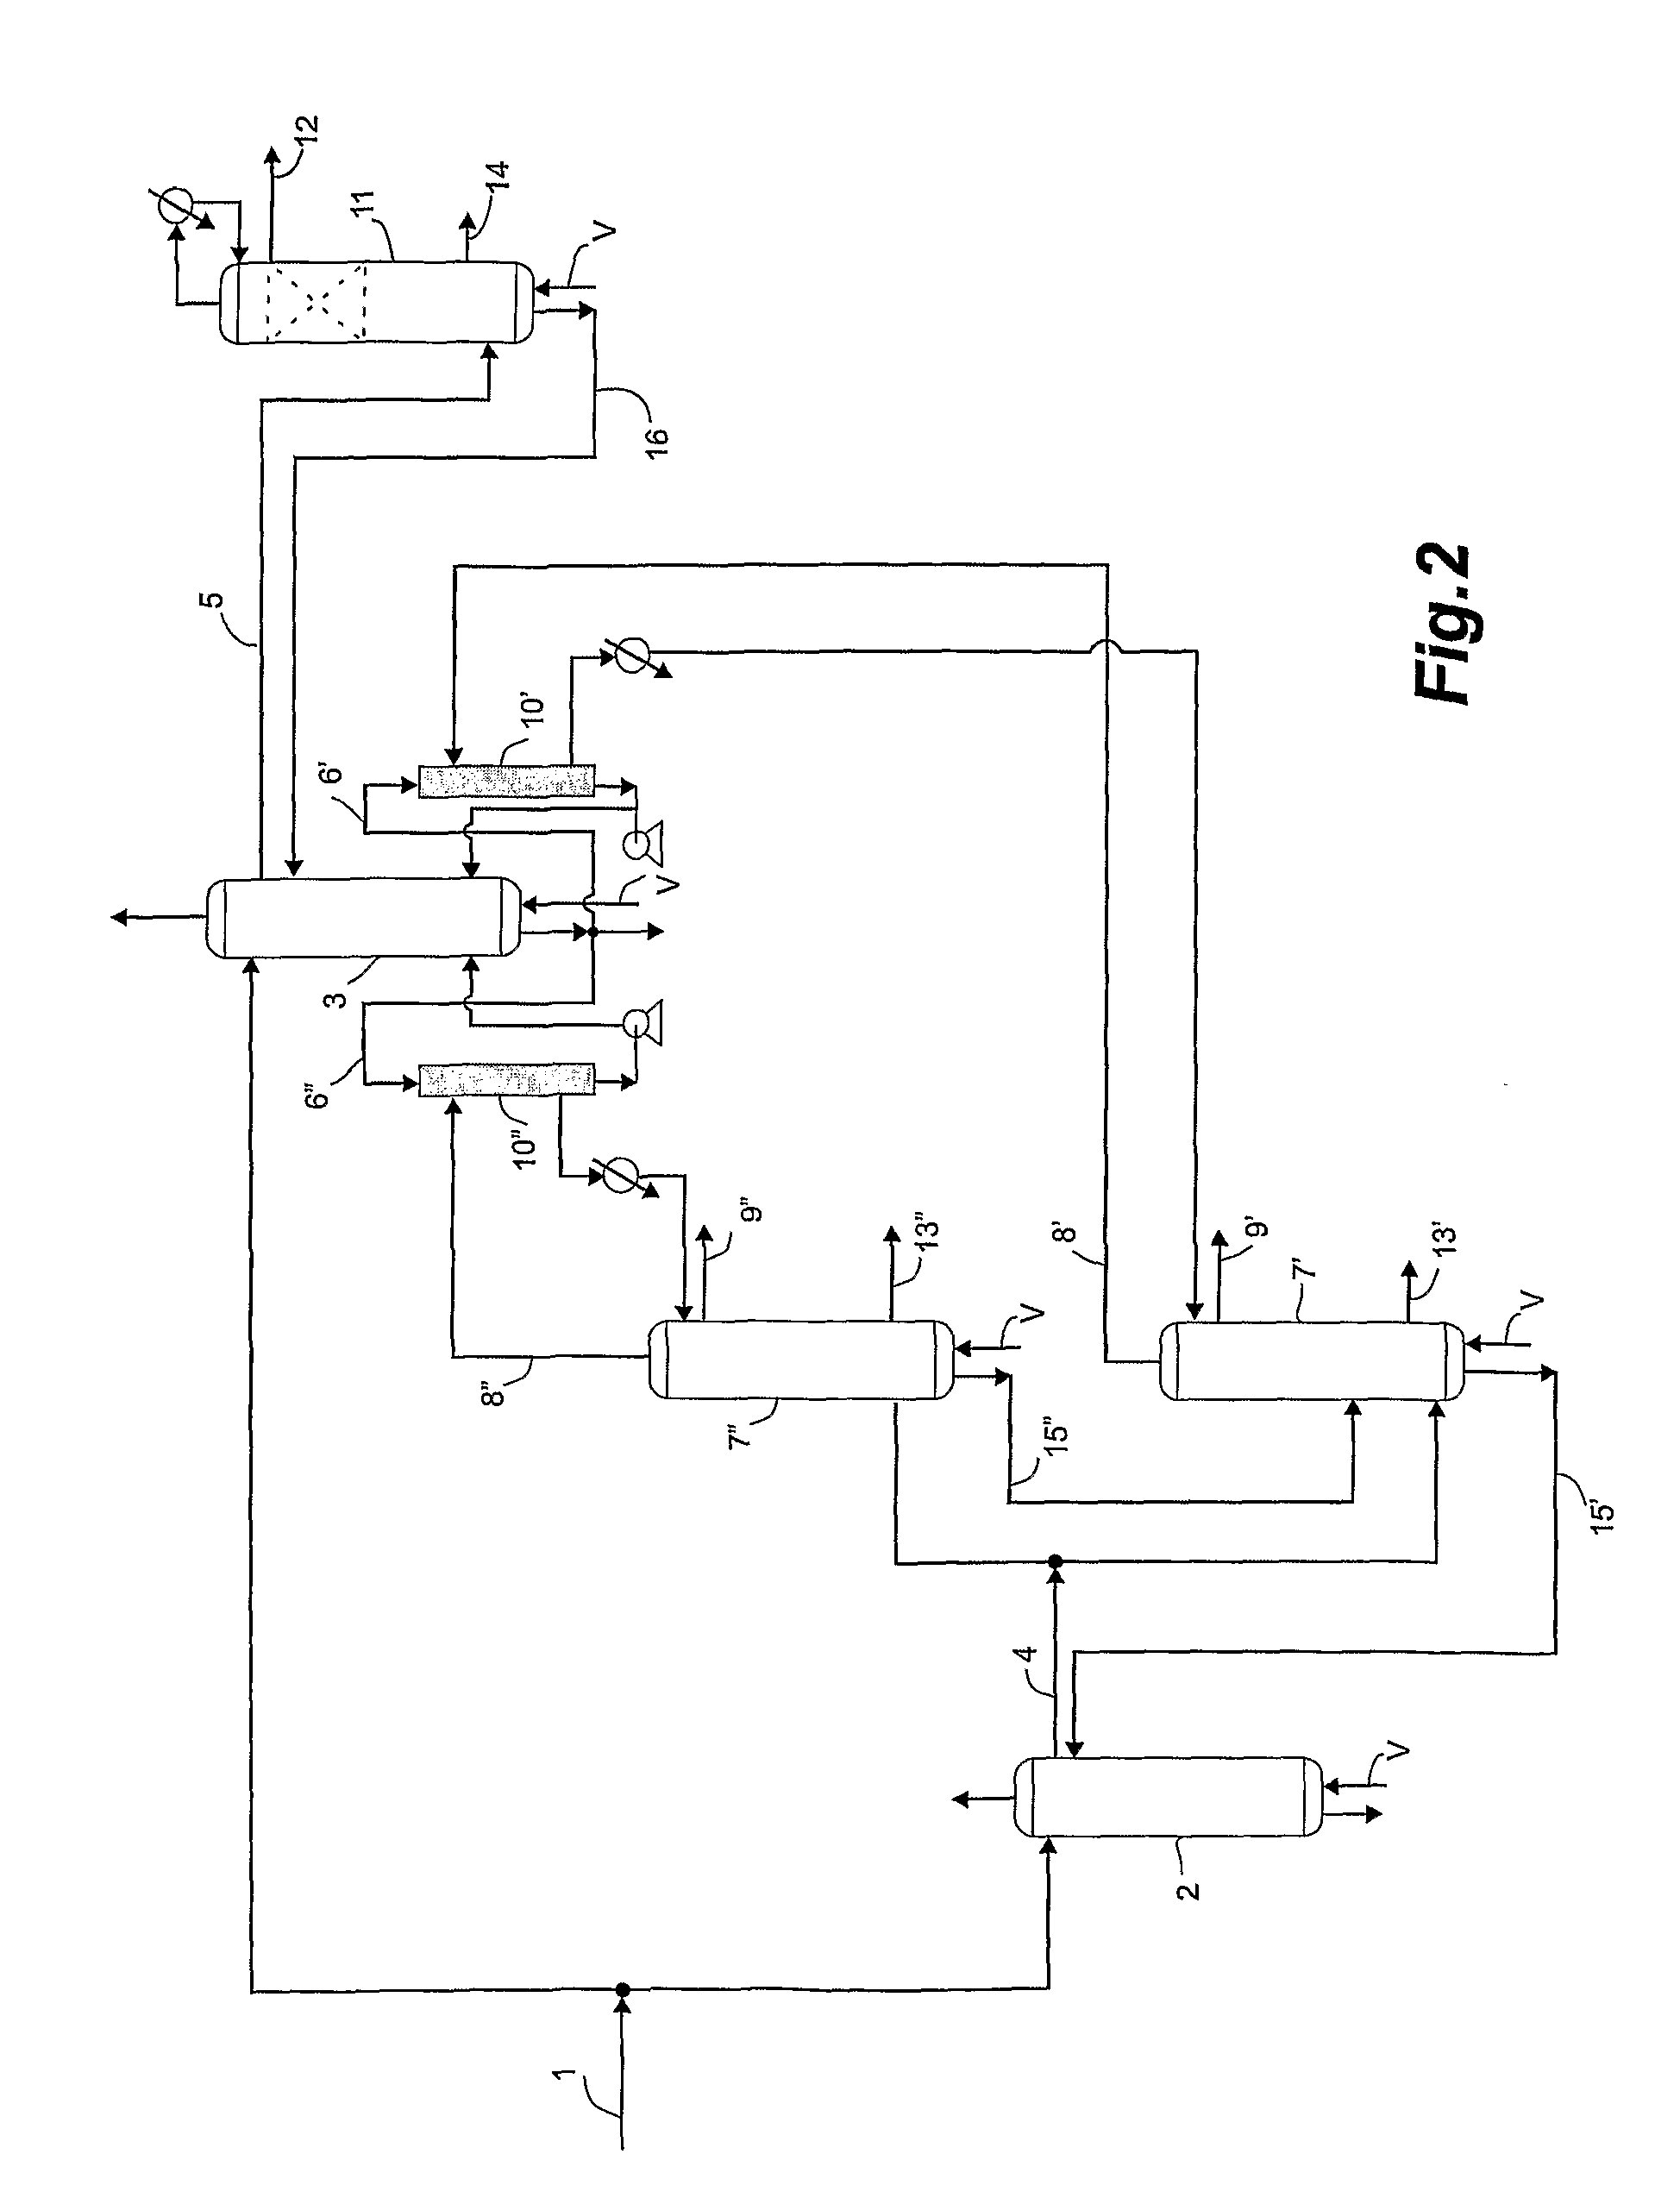 Process and system for producing alcohol by split-feed distillation